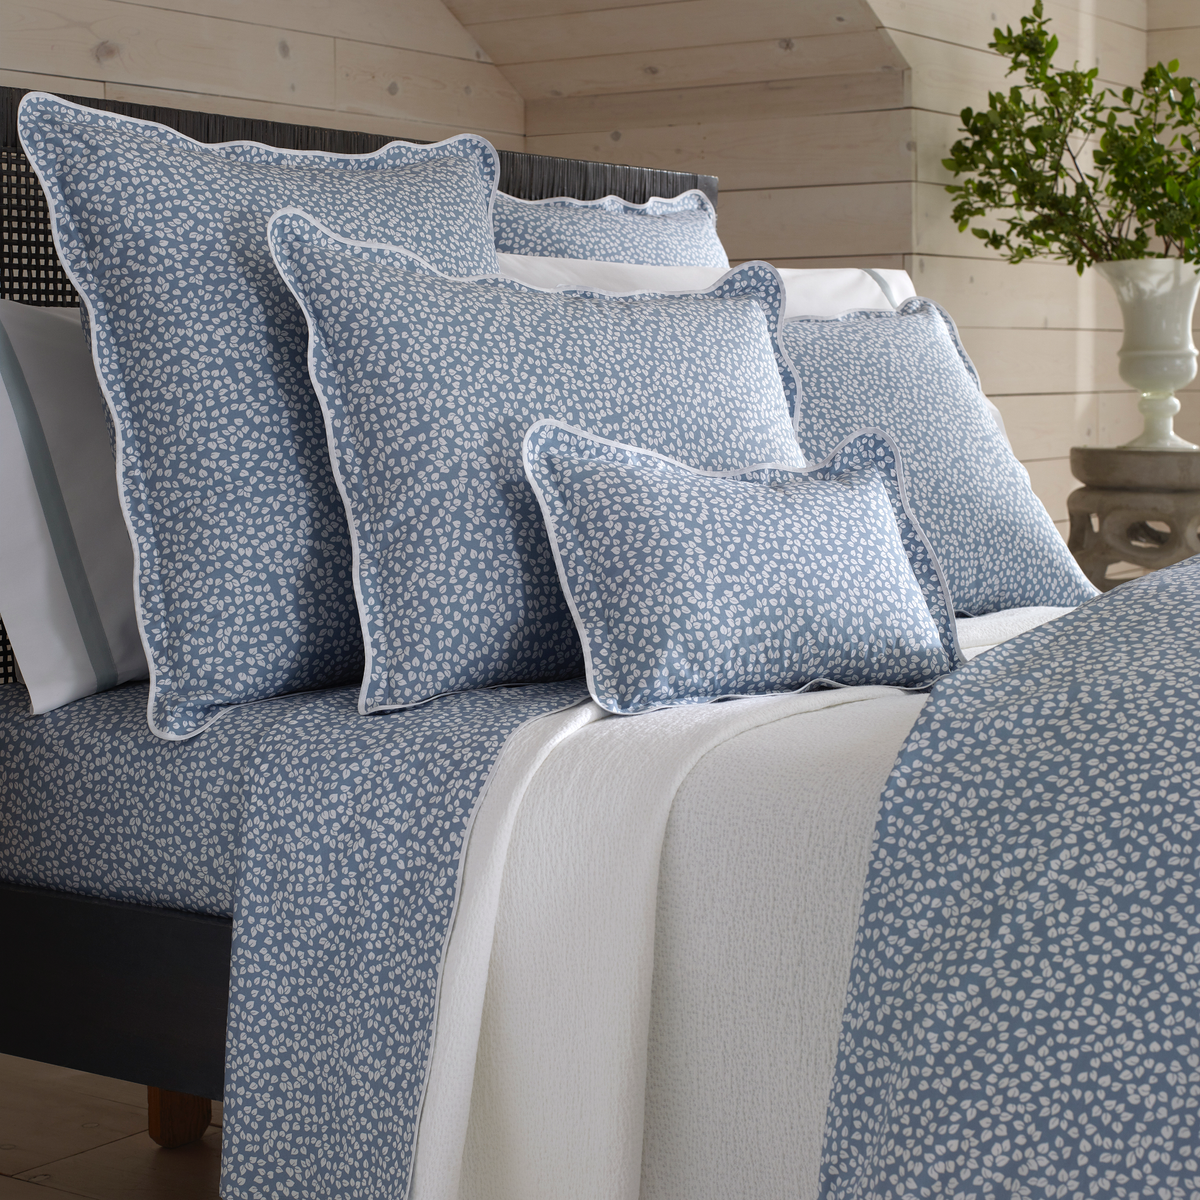 Closeup of Shams and Pillowcases Stacked of Matouk Margot Bedding in Hazy Blue Reverse Color